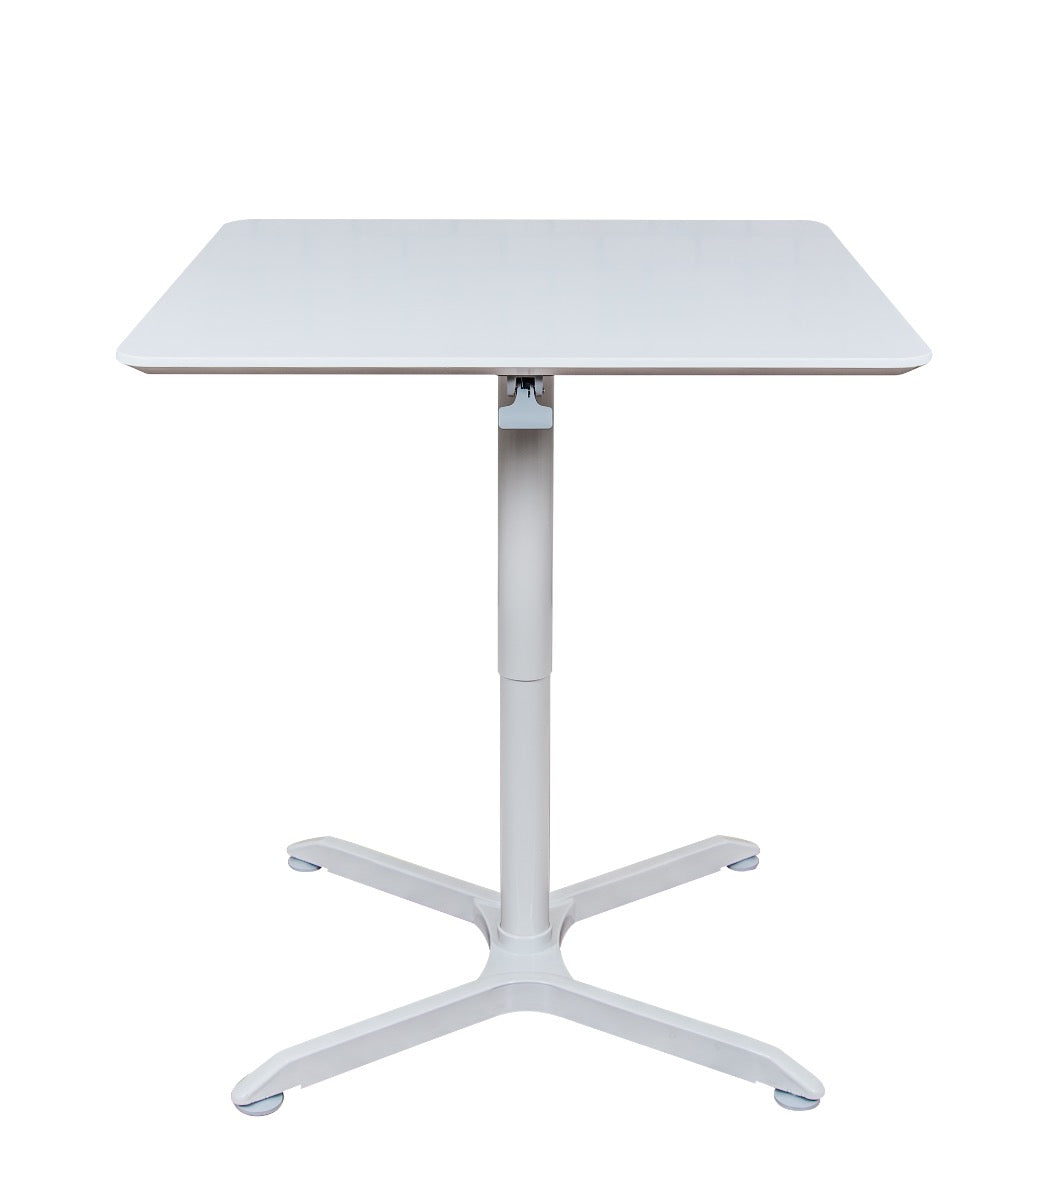 Luxor 36" Square Pneumatic Adjustable Height Cafe Table 31.5"W x 27.6" to 42.4"H (Gray) - LX-PNADJ-36SQ